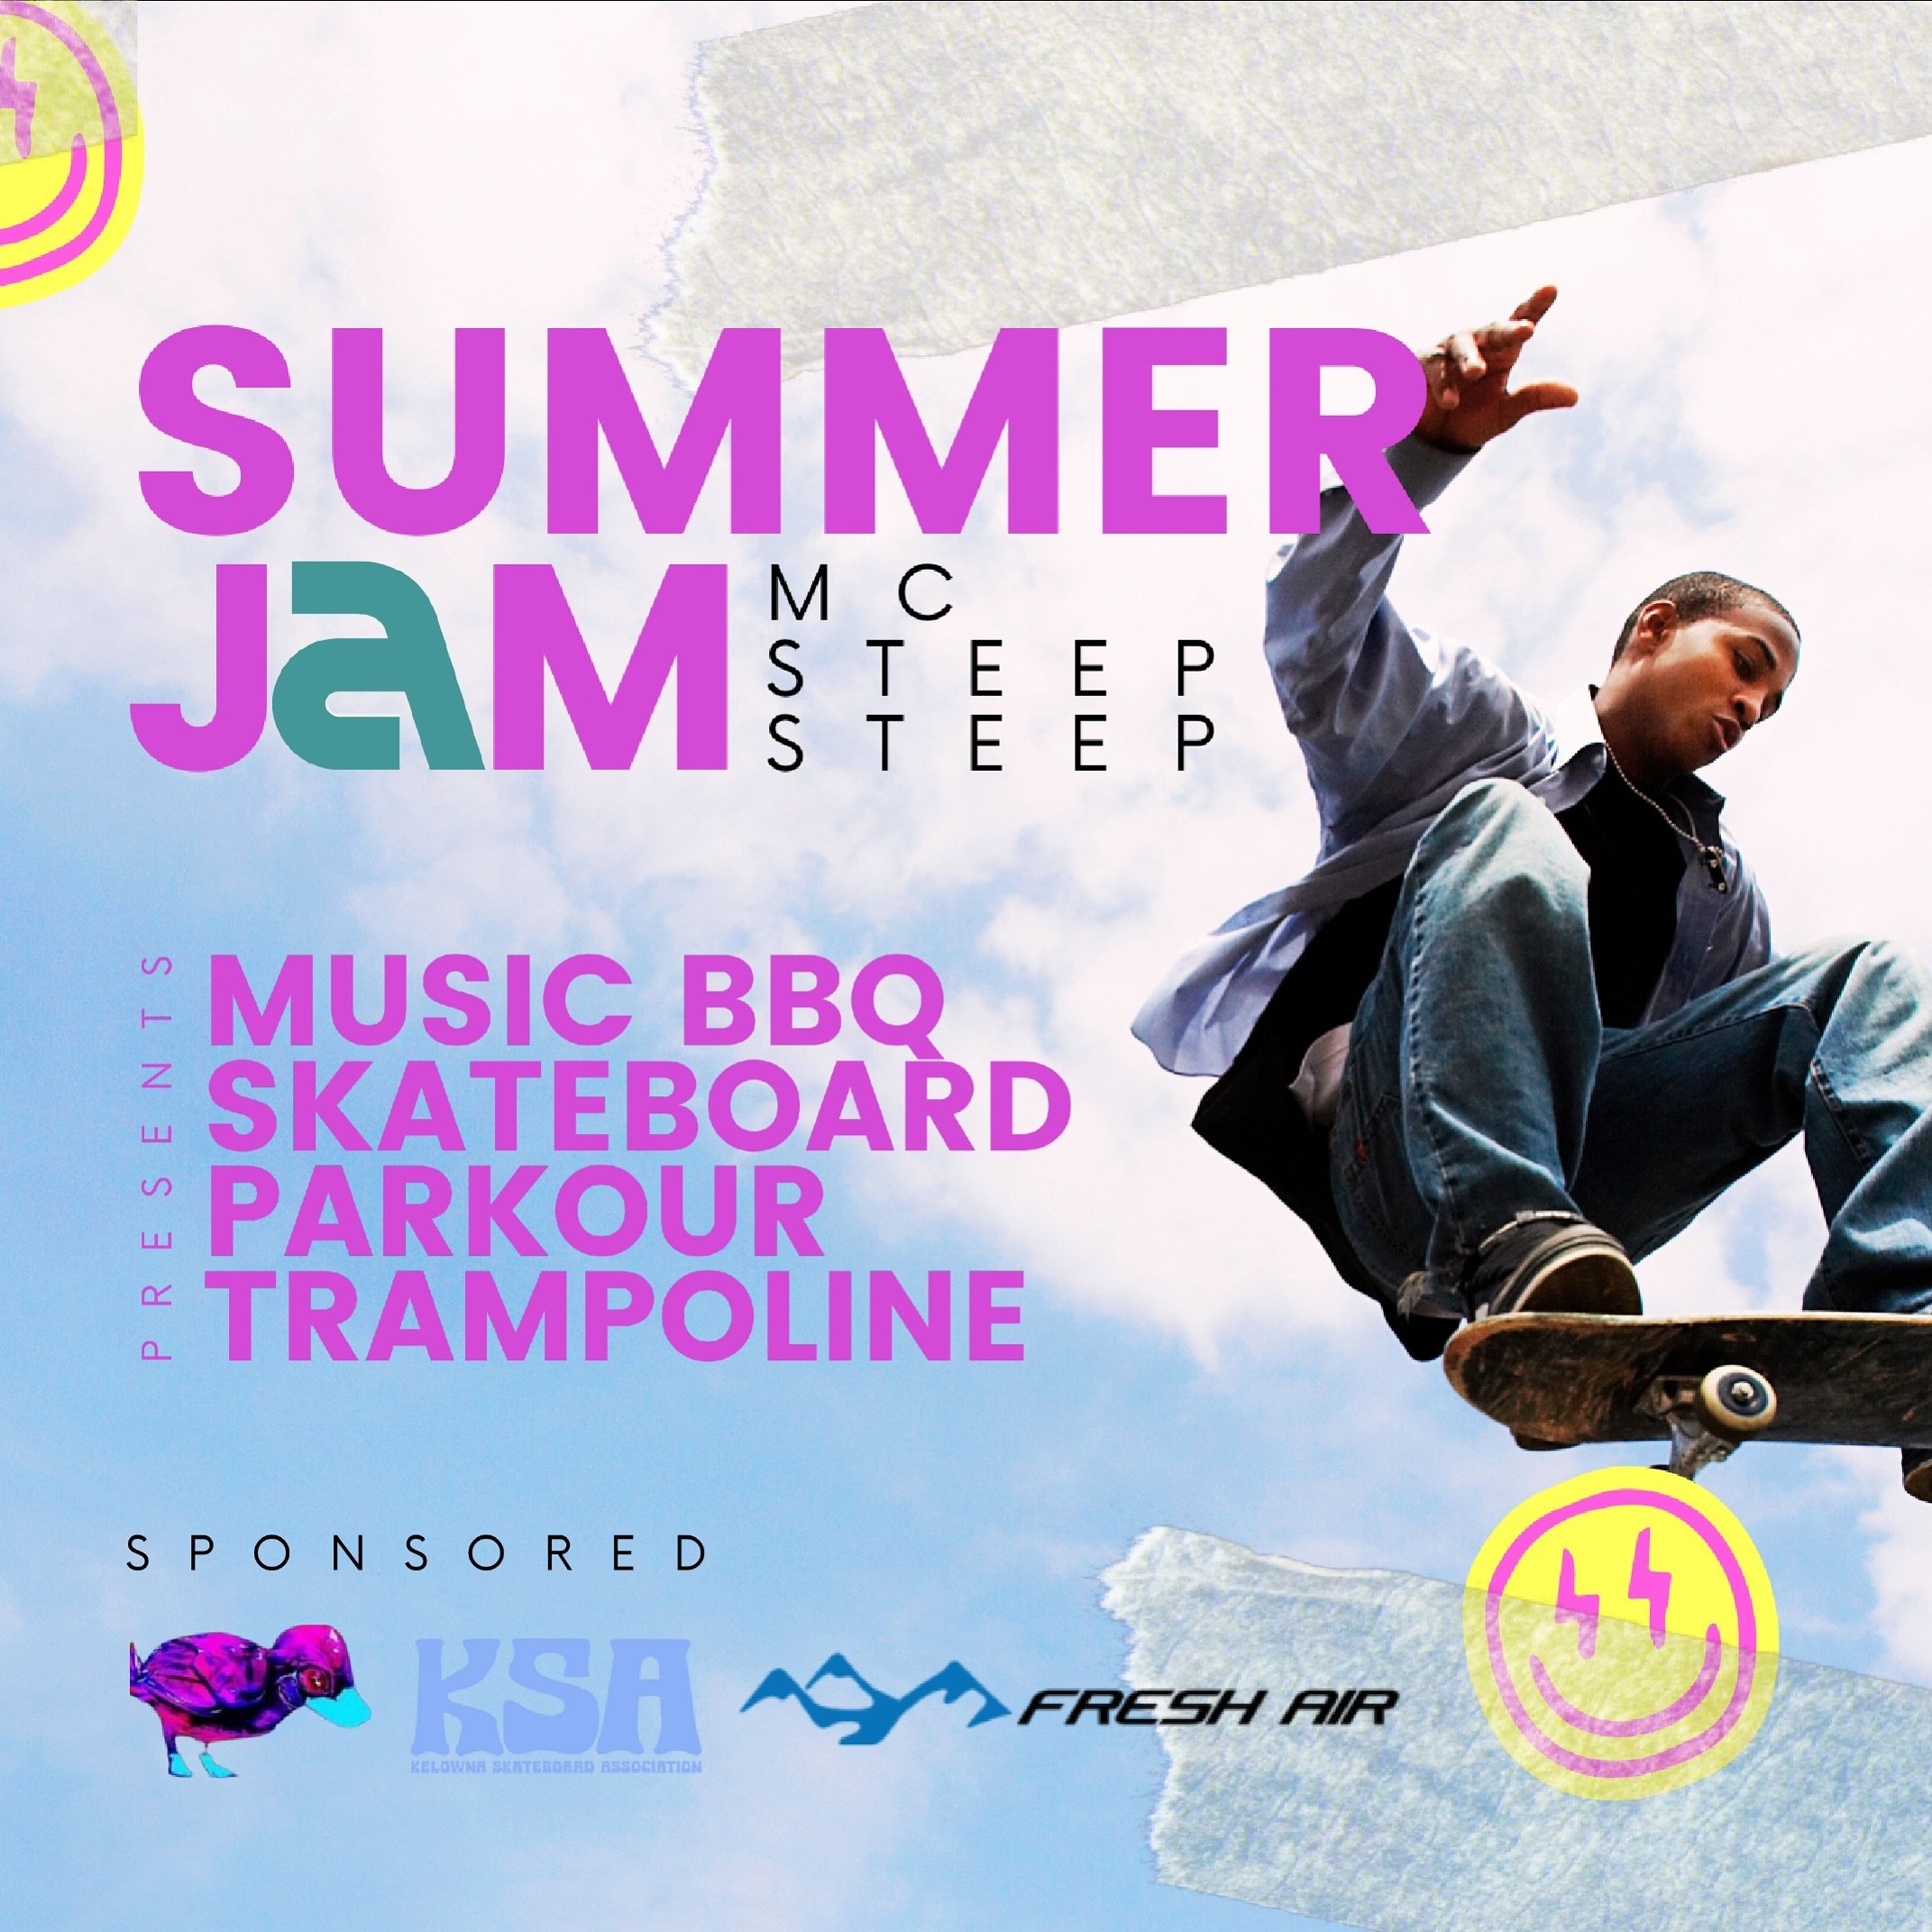 Get ready to jumpstart your summer with an epic Trampoline, Skateboard, and Parkour Jam at @airhouse.kelowna!

Enrol to get in on the bbq food and a drink ticket to keep you fueled up for the fun. 

This is an open jam session where everyone from beg